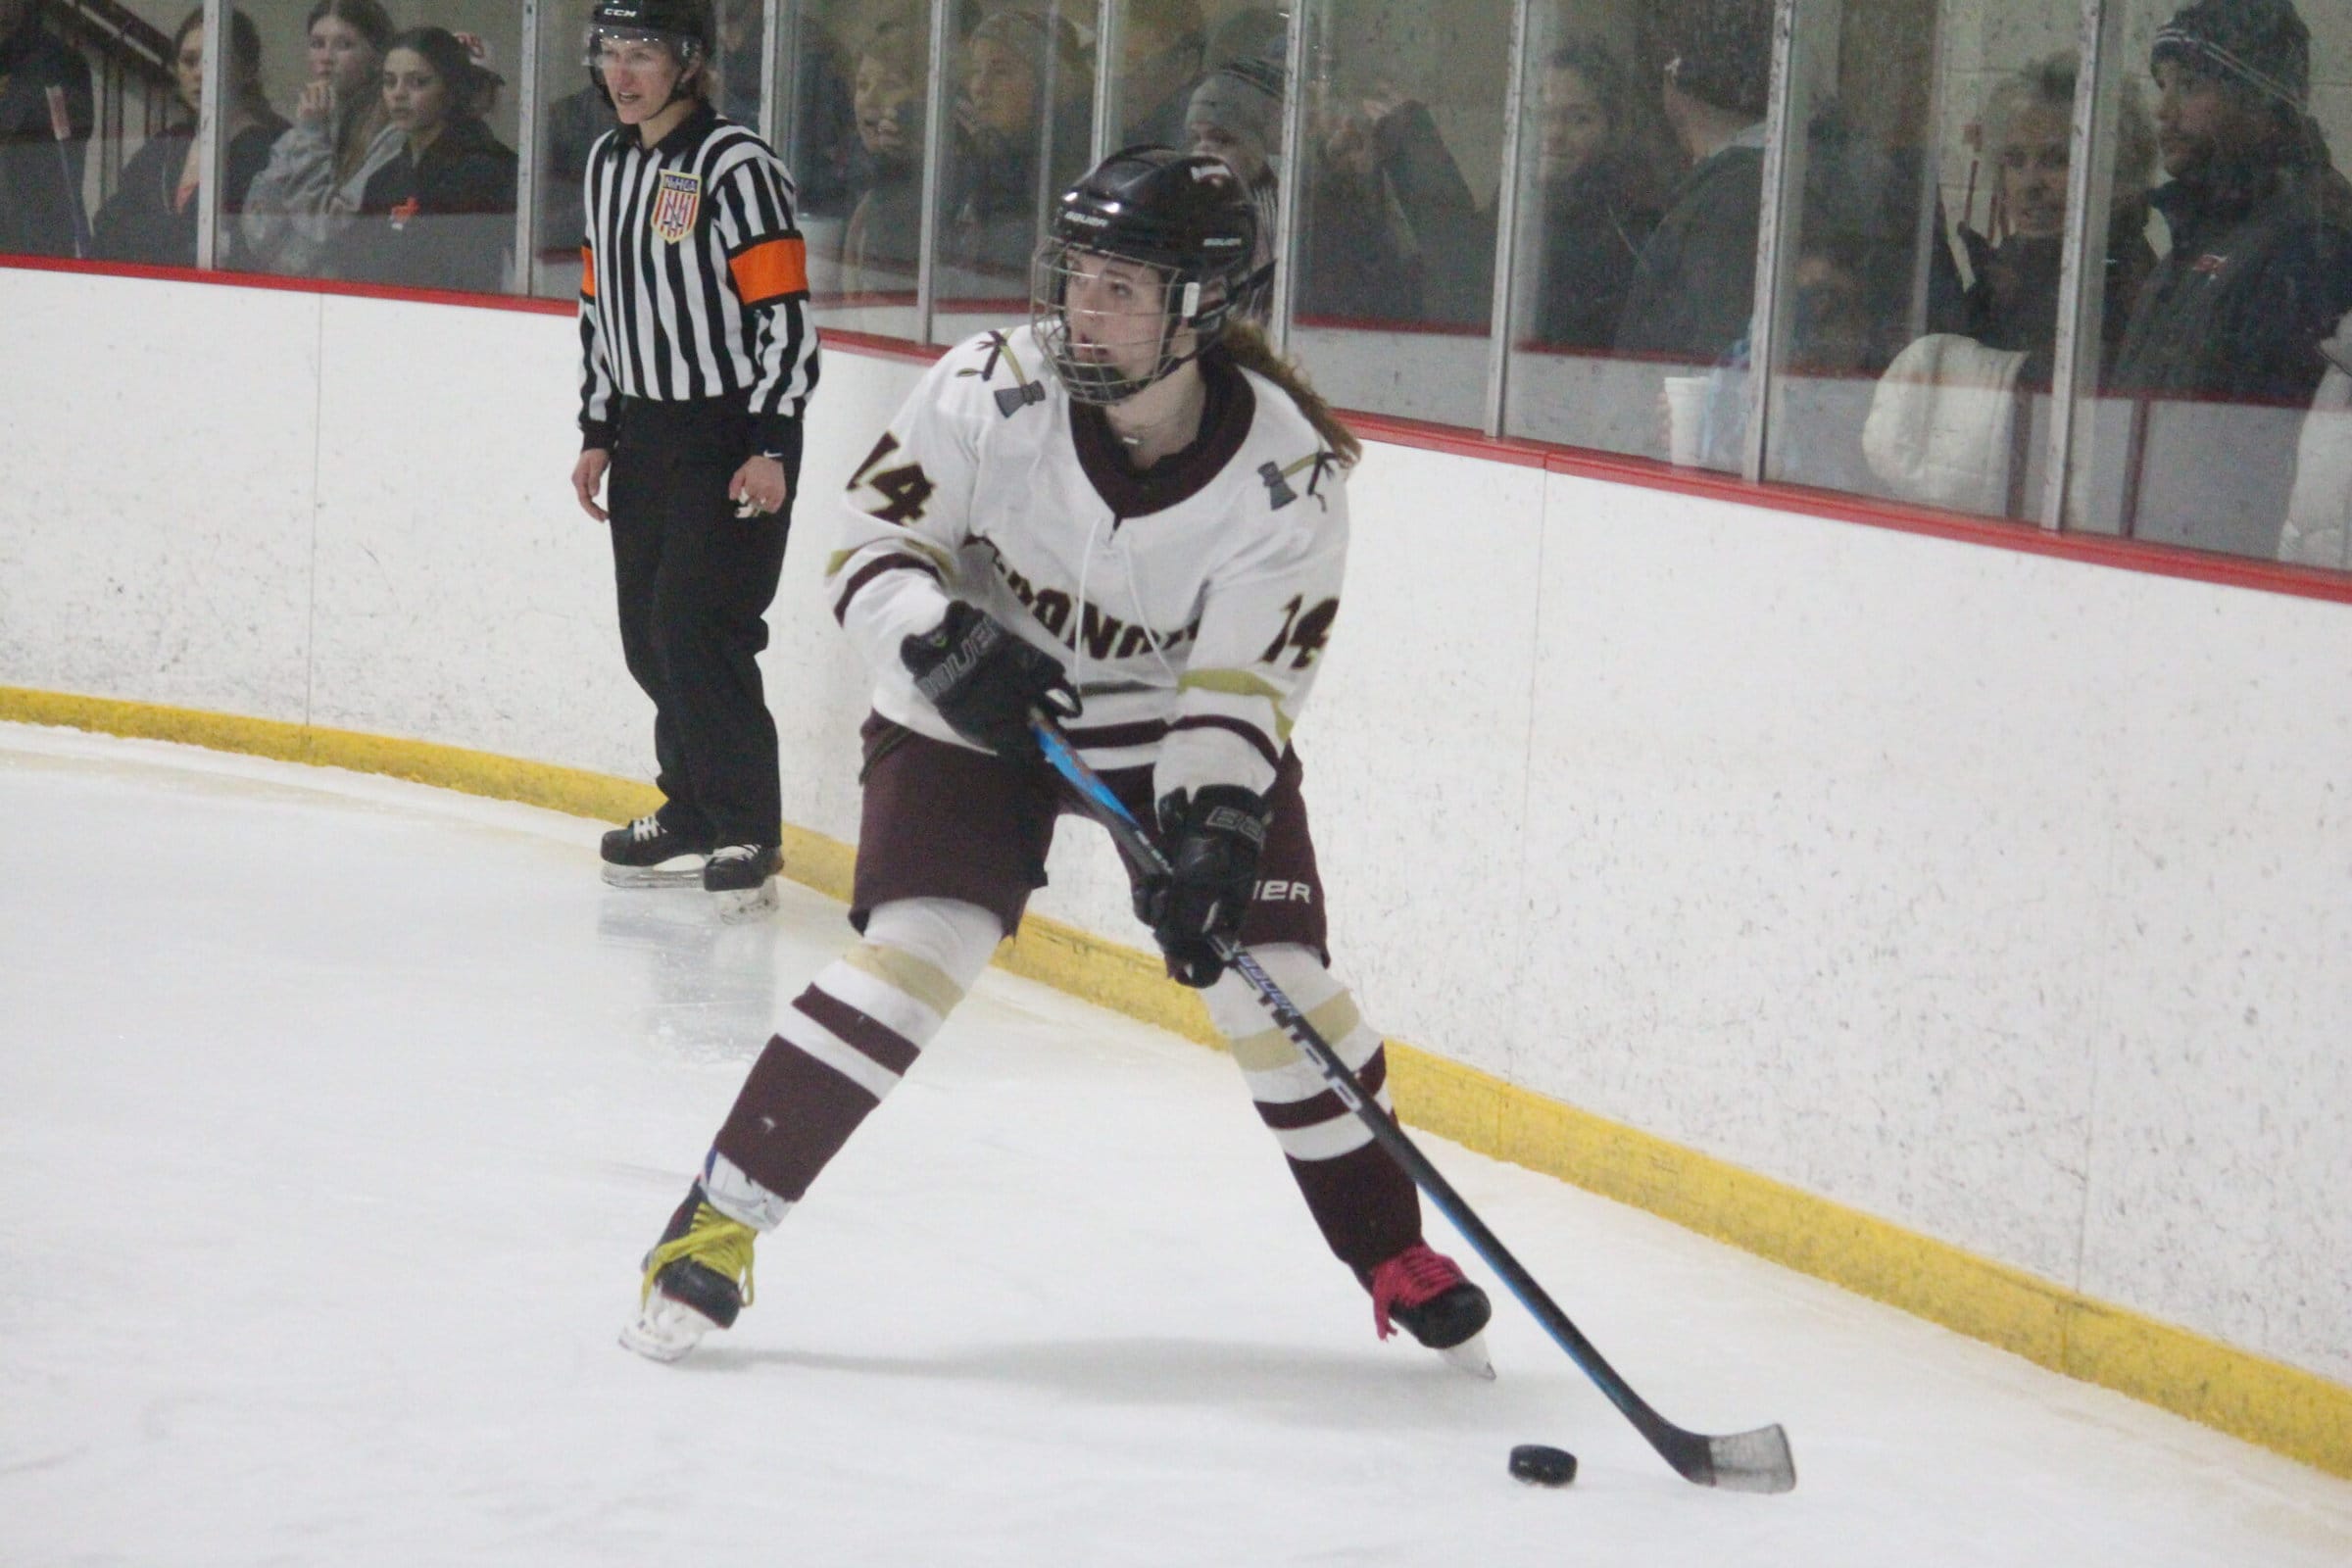 Attack of the Titans: Offense powers Algonquin girls hockey to playoff win over Dedham